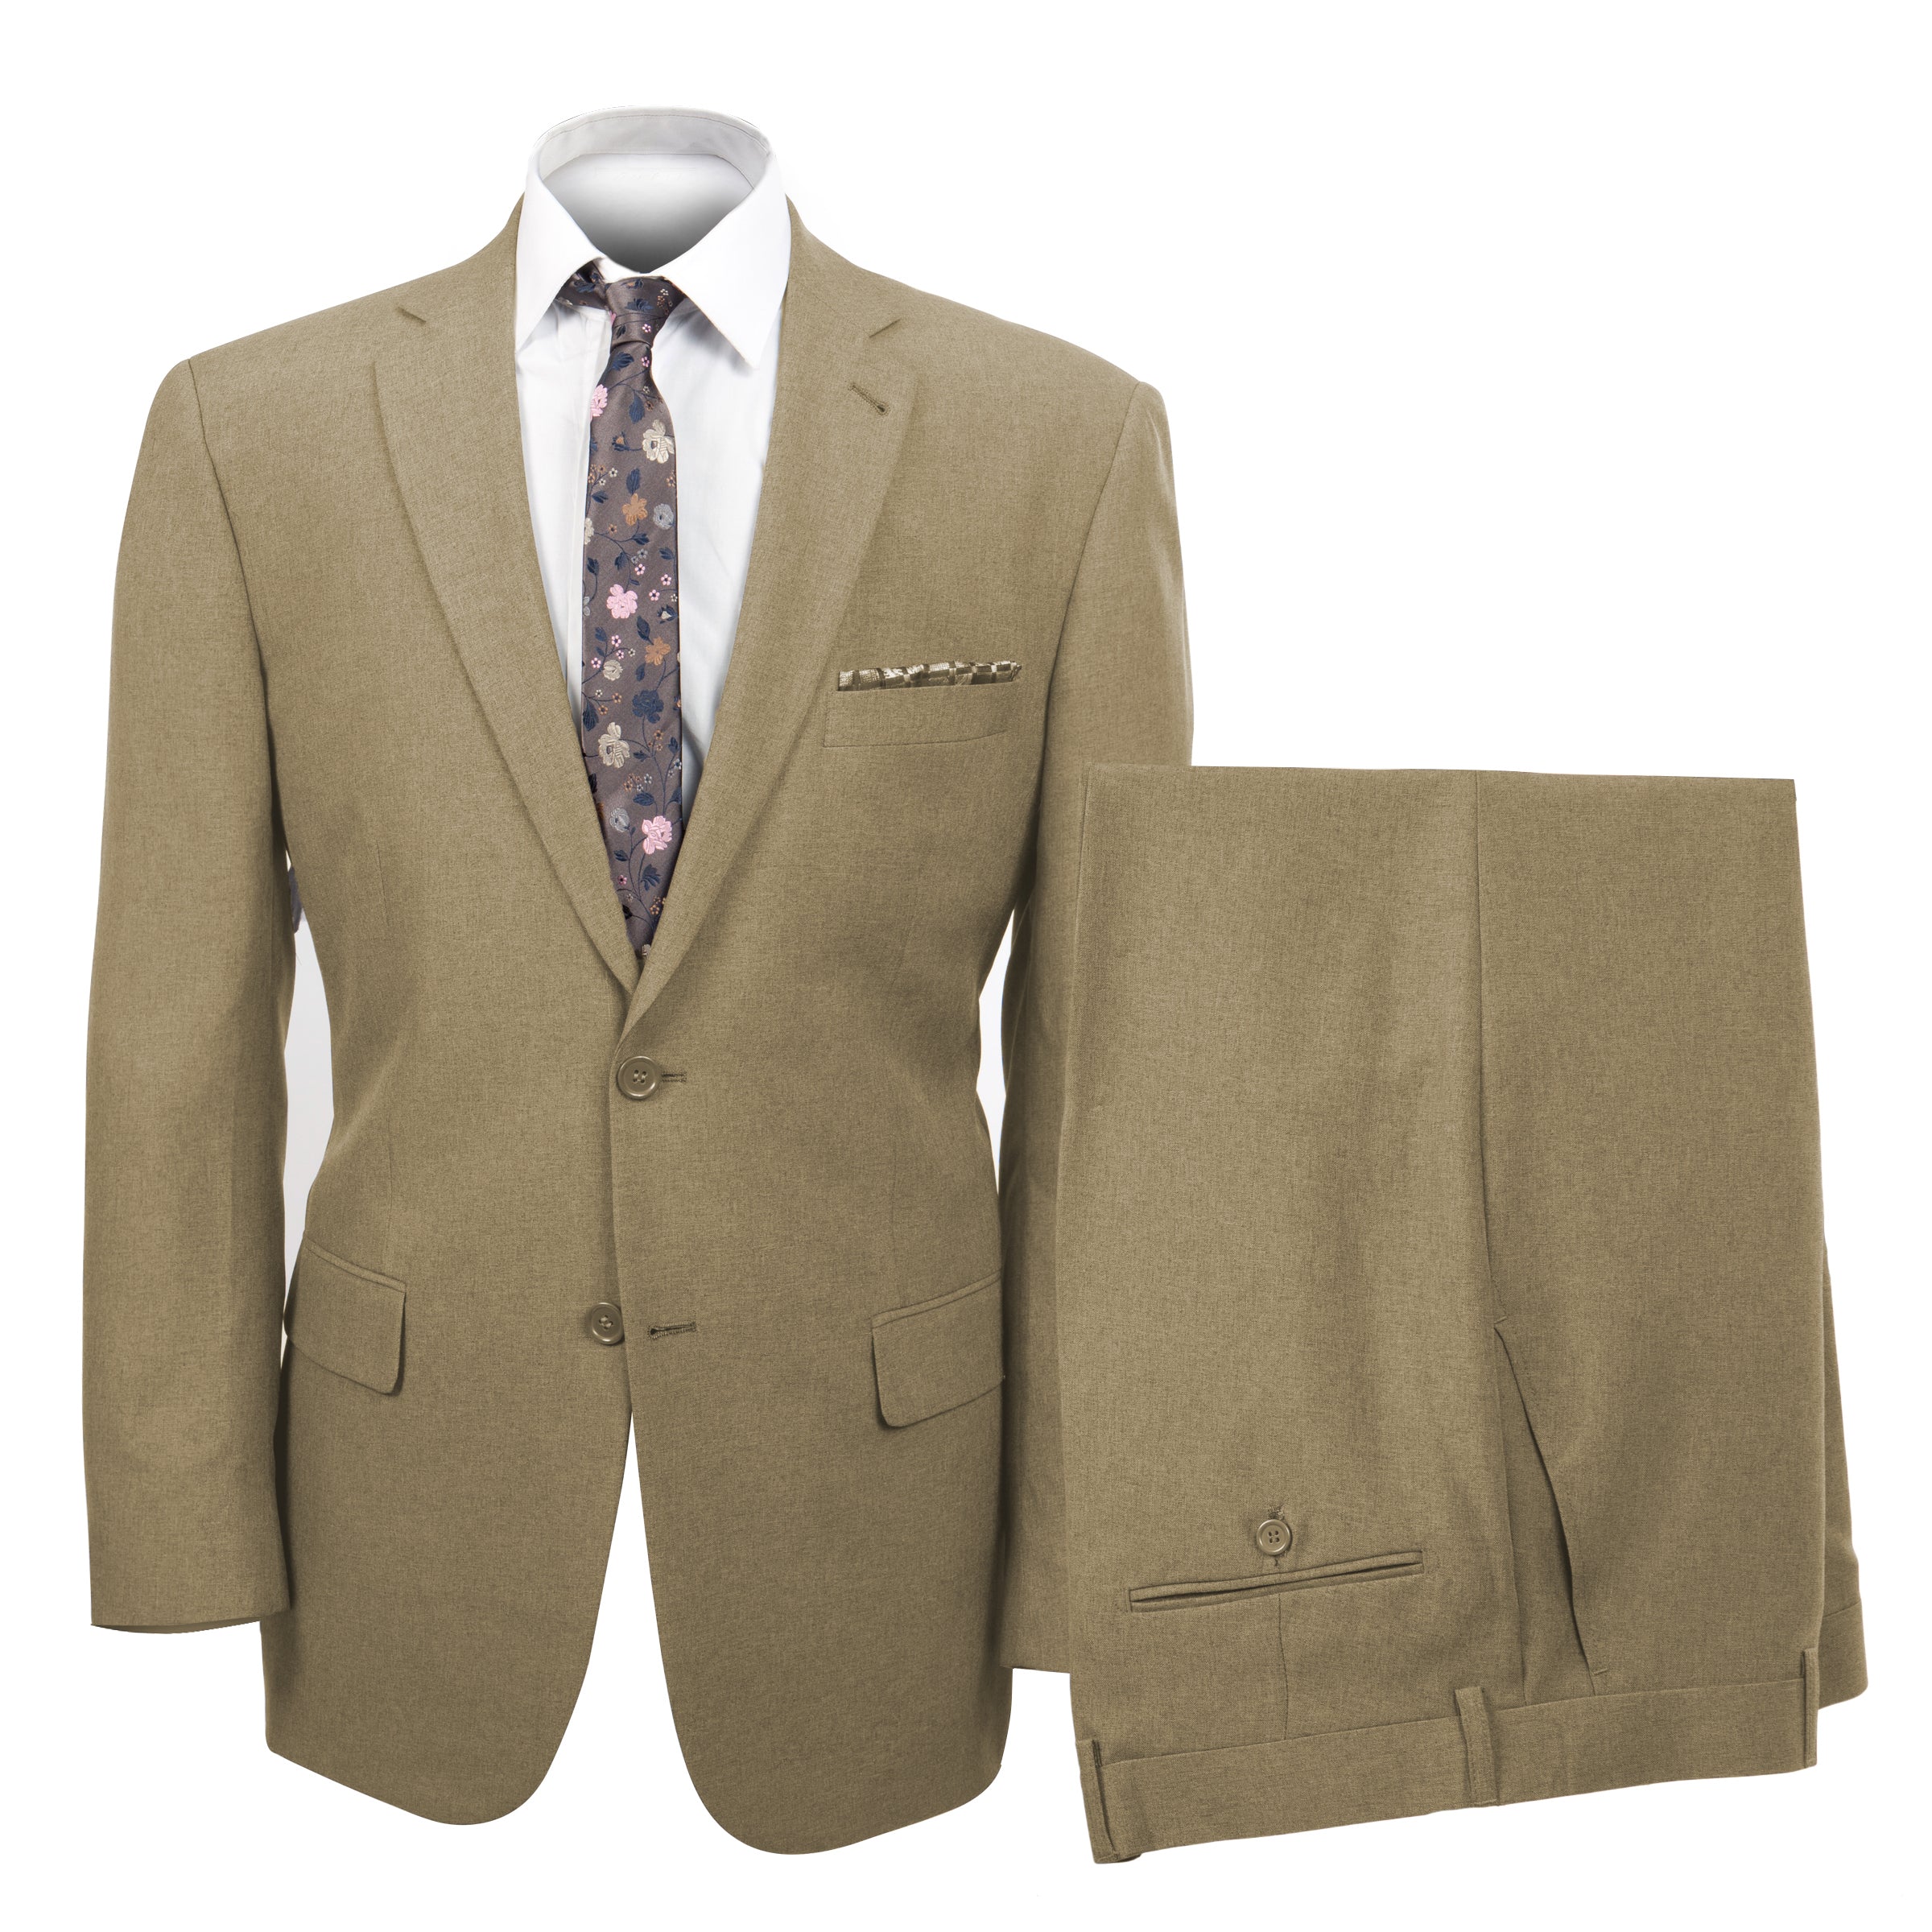 Tan Suit For Men Formal Suits For All Ocassions M116-03